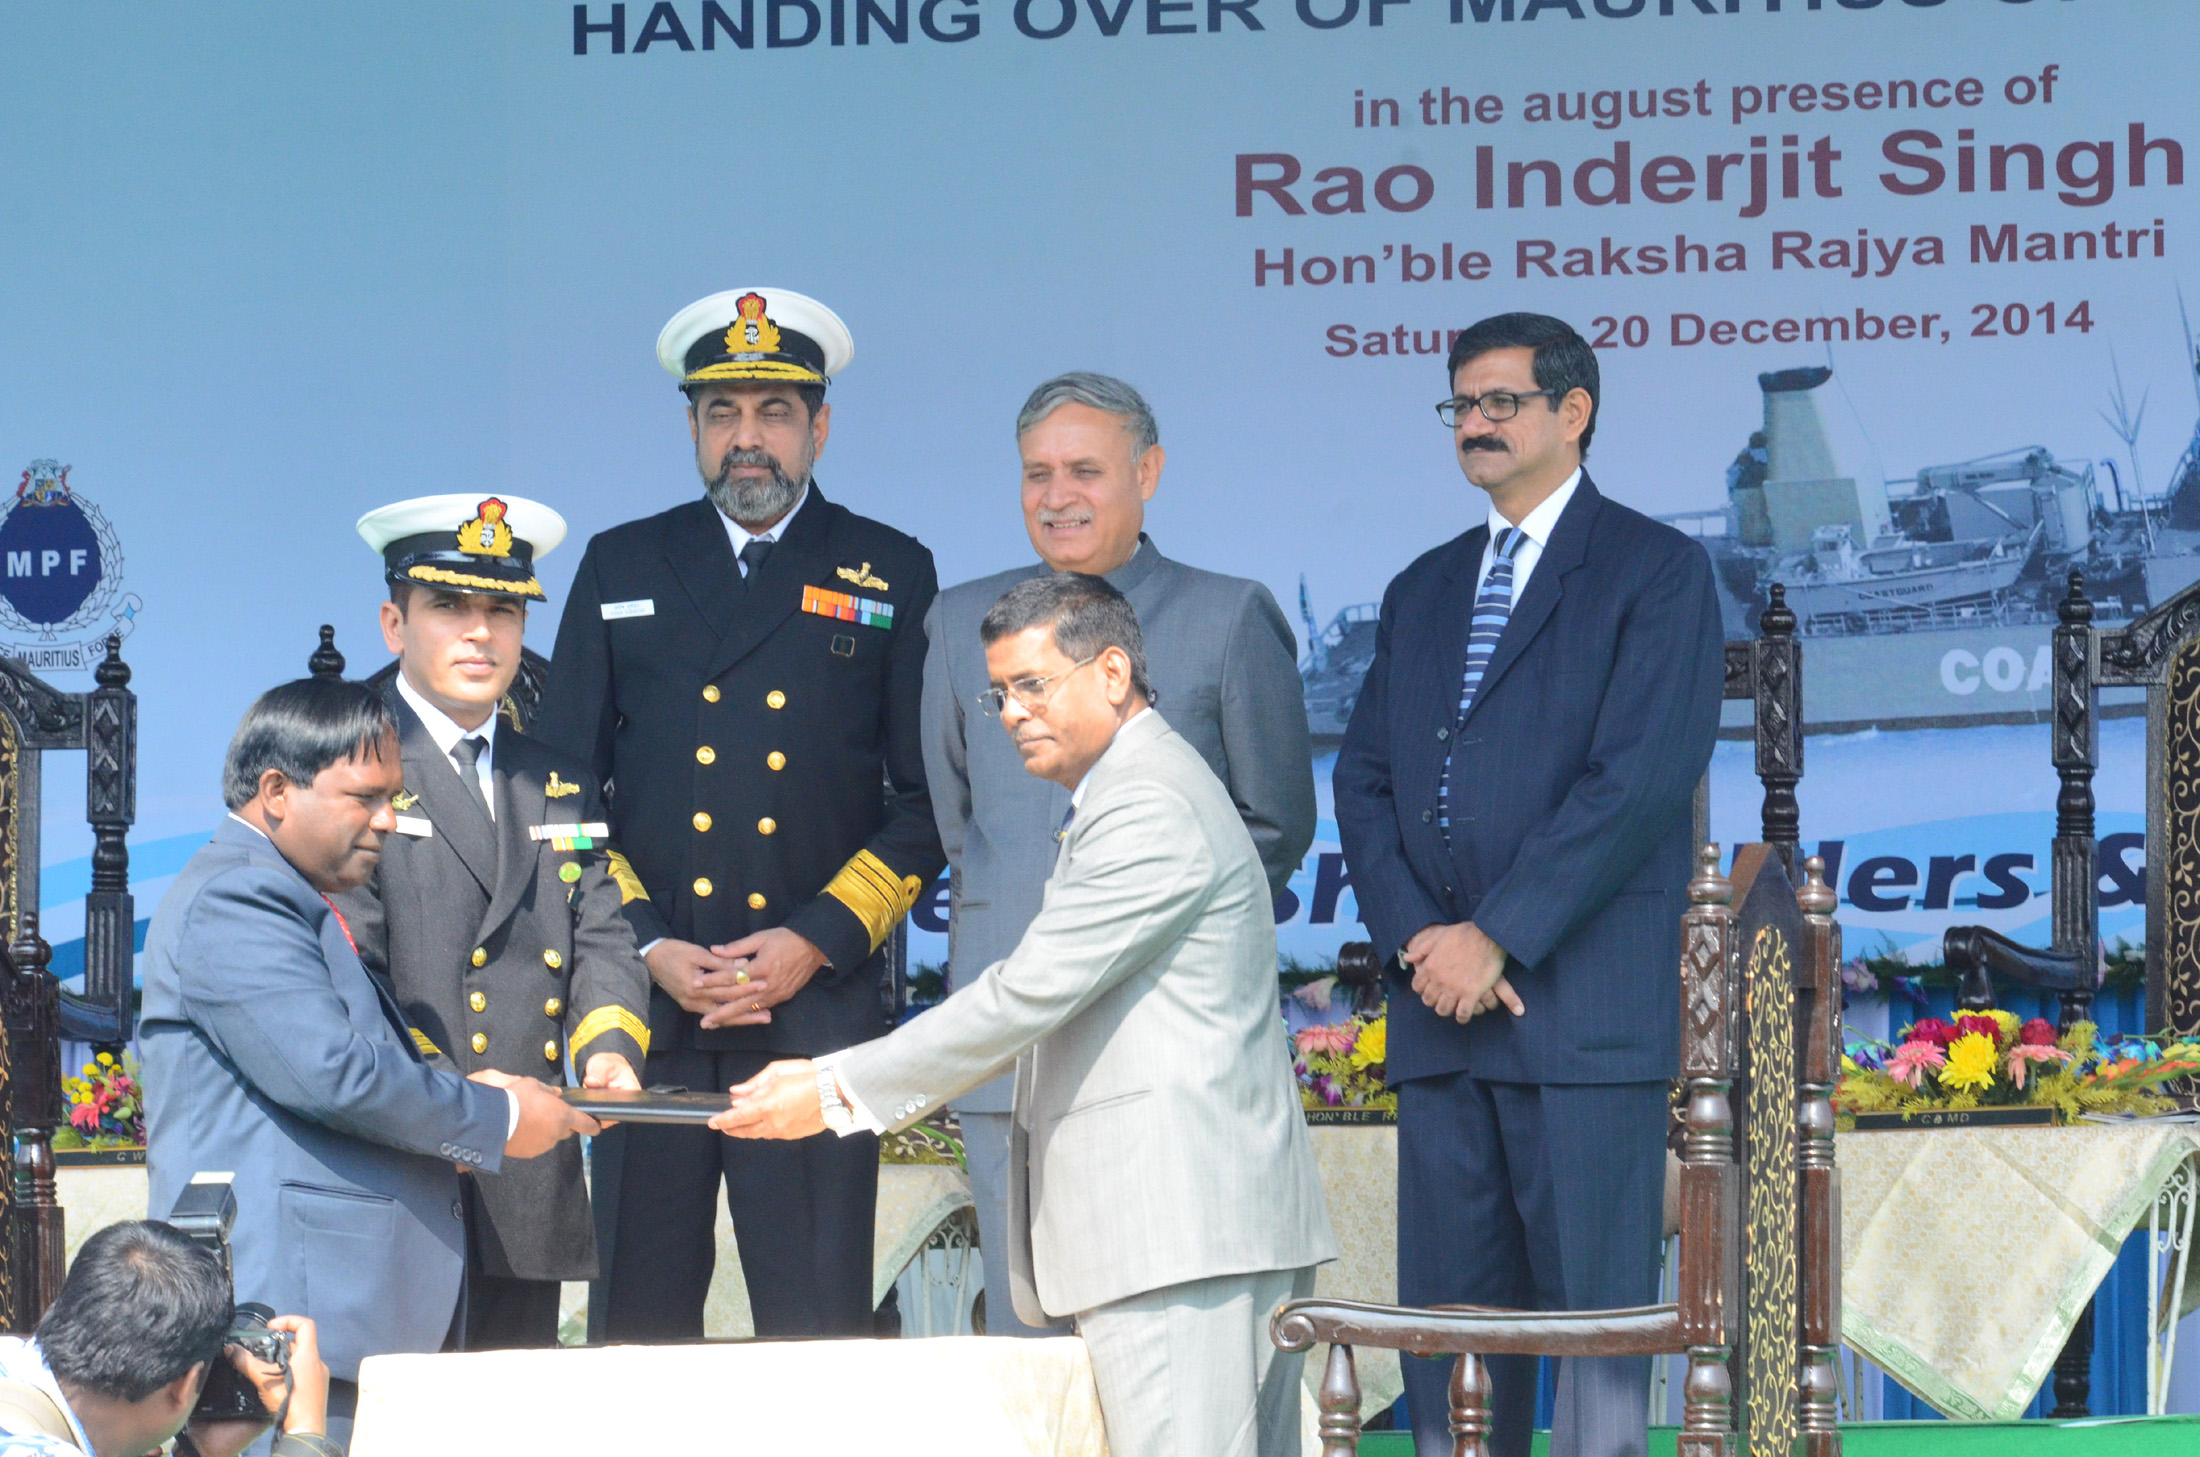 Rao Inderjit Singh at the handing over ceremony of the Mauritius Offshore Patrol Vessel (MOPV) “Barracuda”